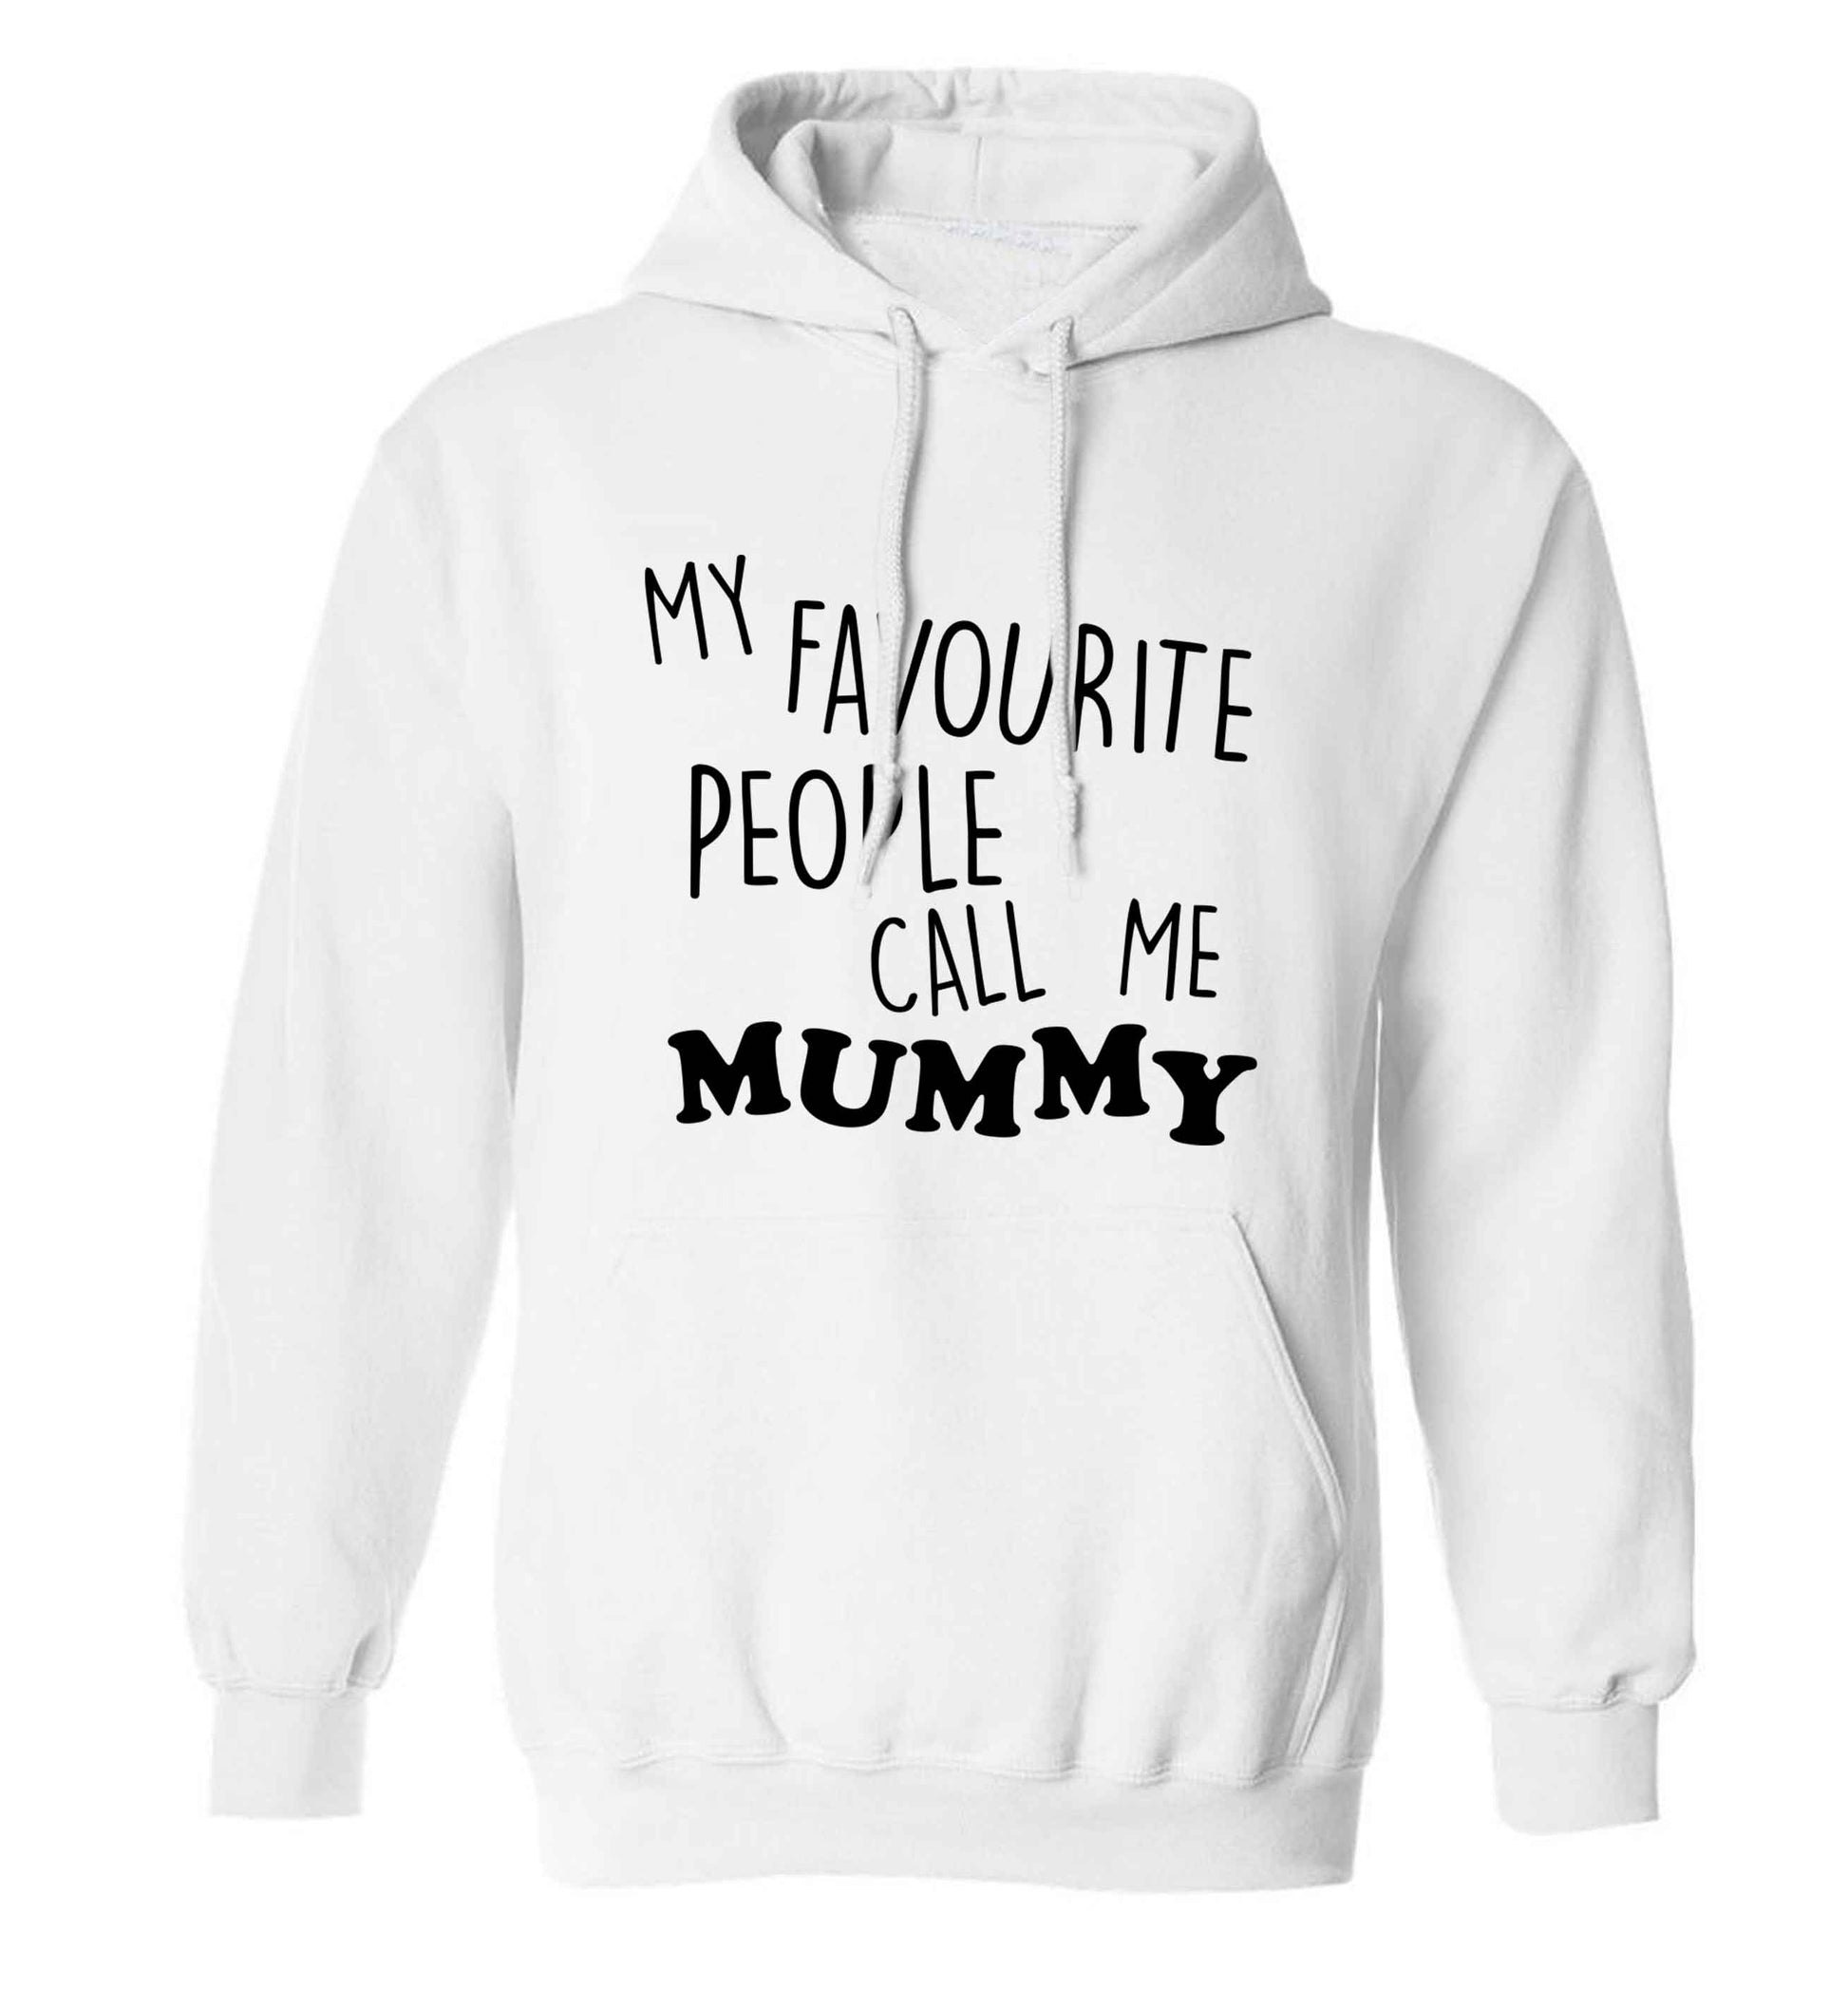 My favourite people call me mummy adults unisex white hoodie 2XL